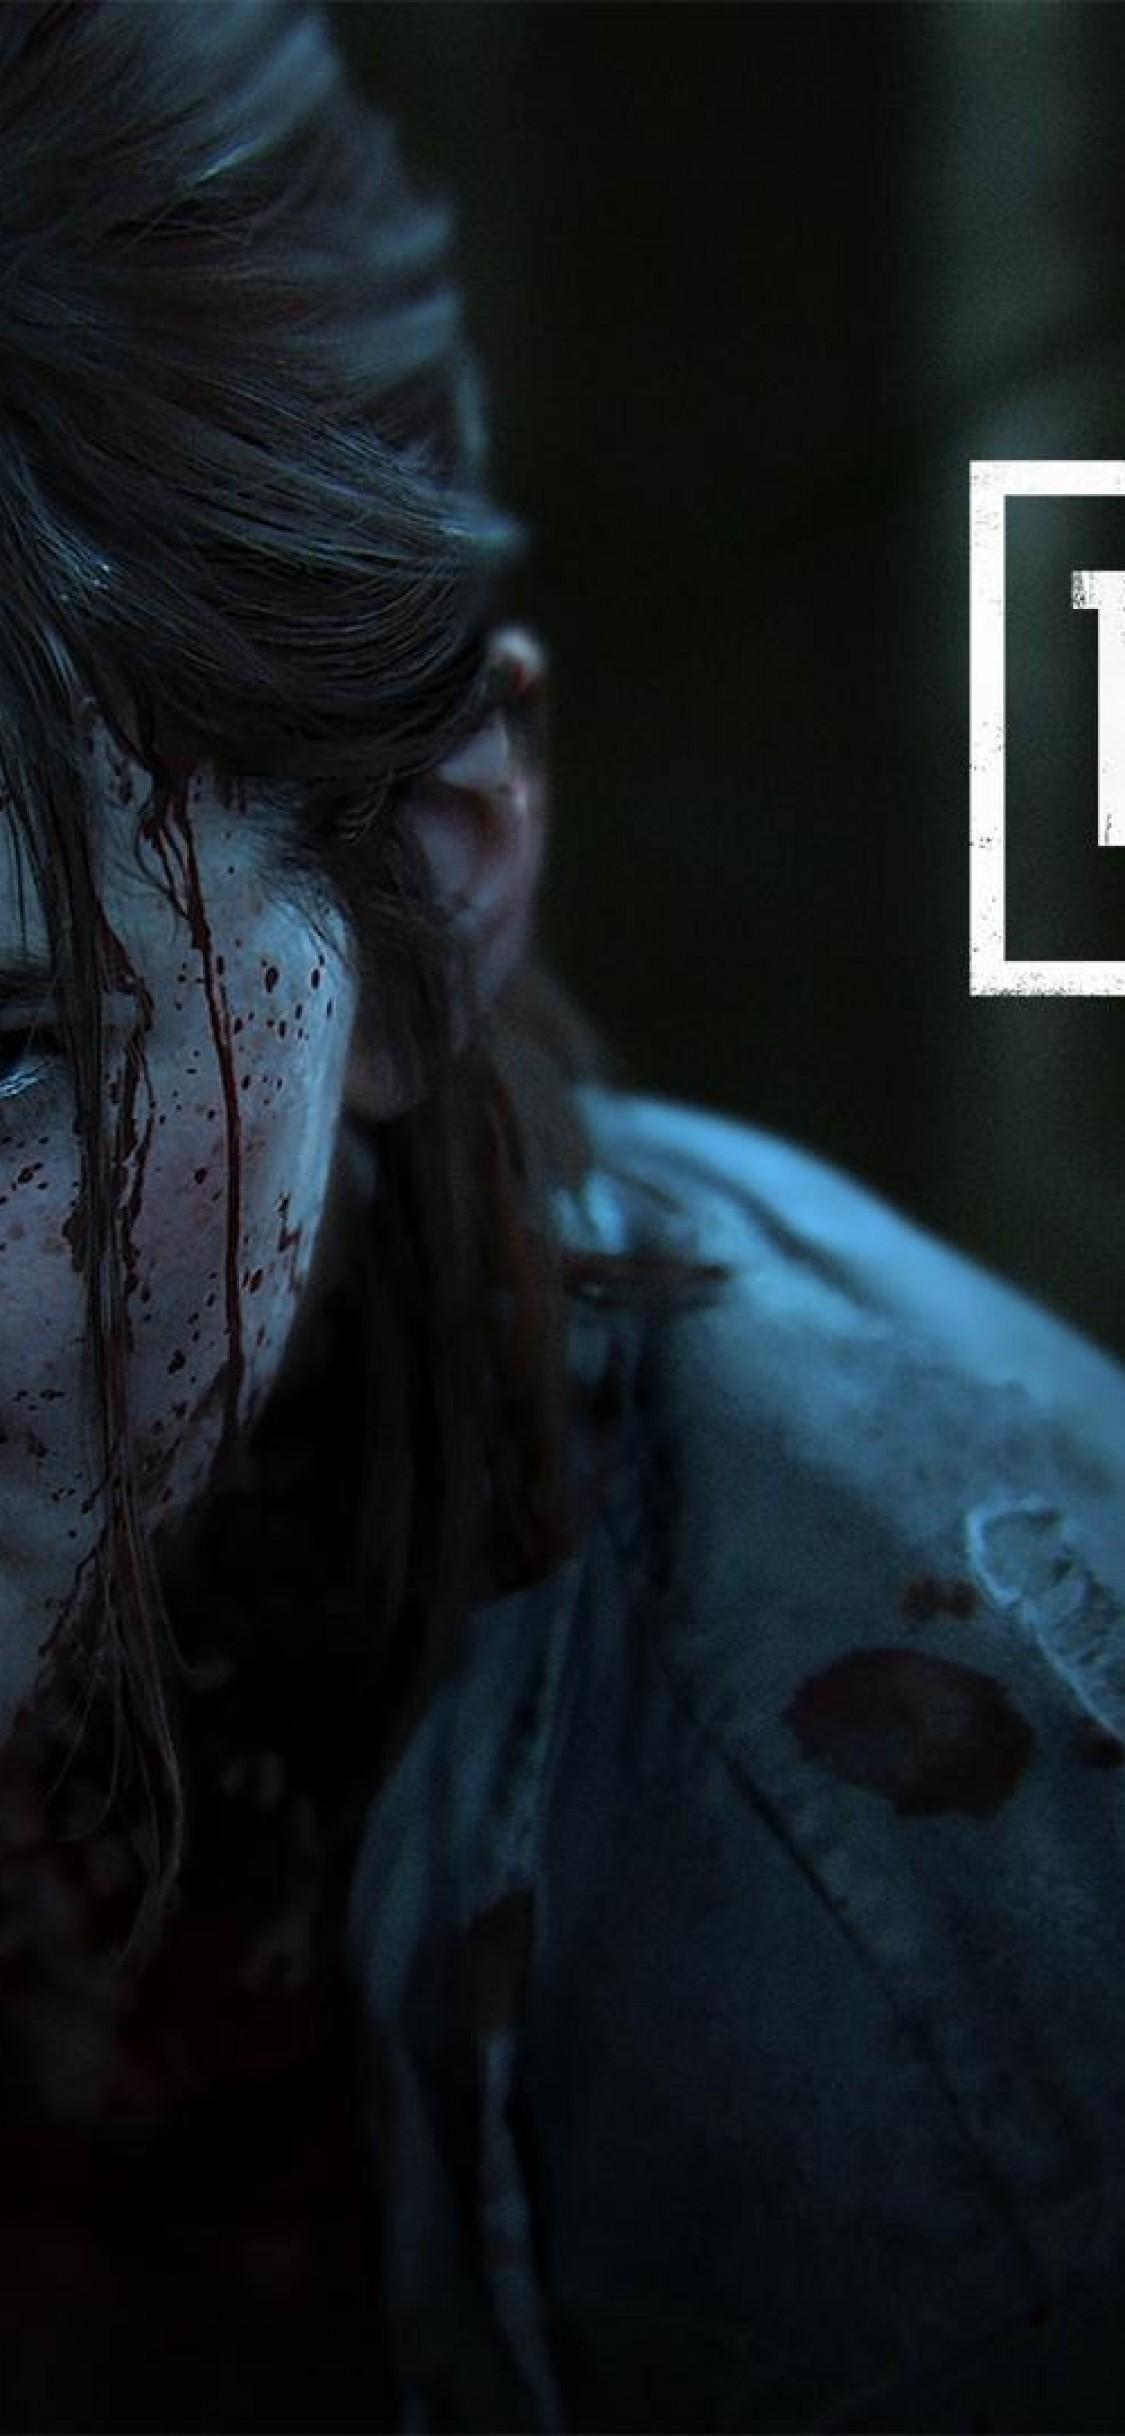 The Last Of Us Part Ii Outbreak Day, Ellie Of Us 2 Imagens